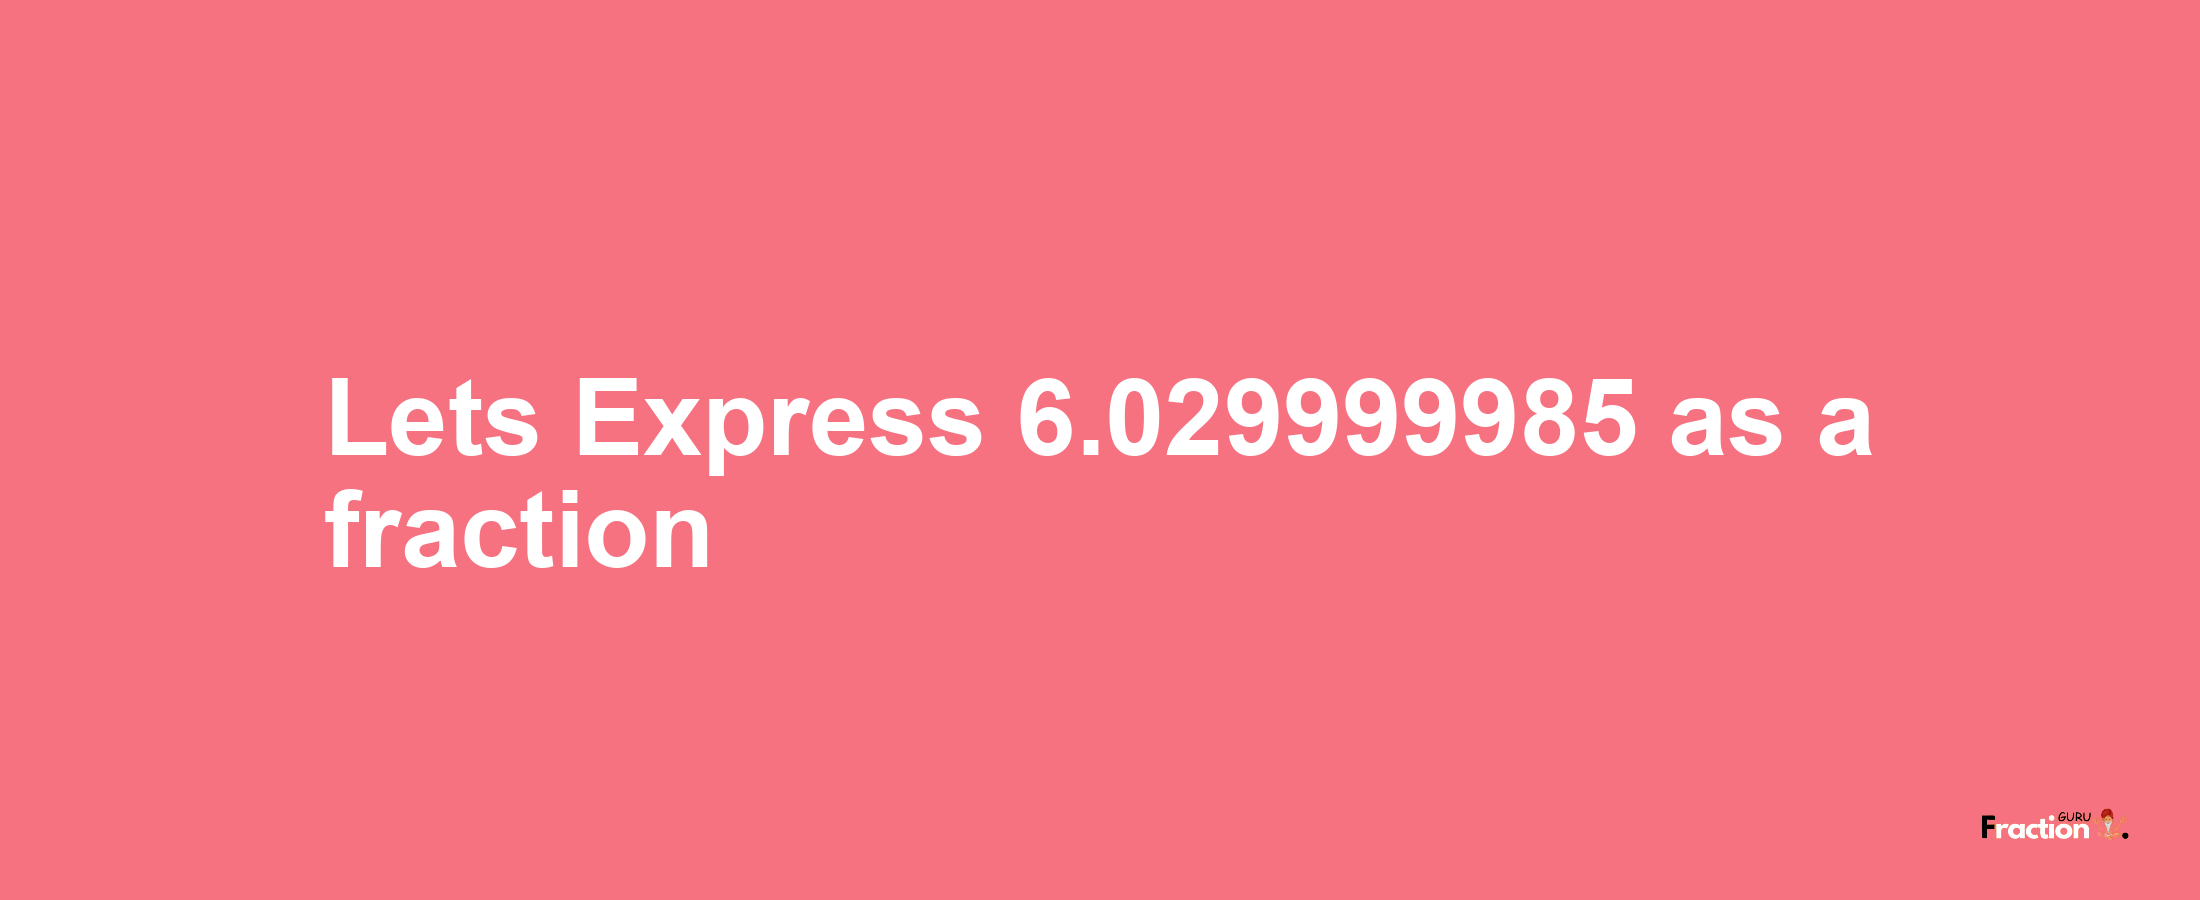 Lets Express 6.029999985 as afraction